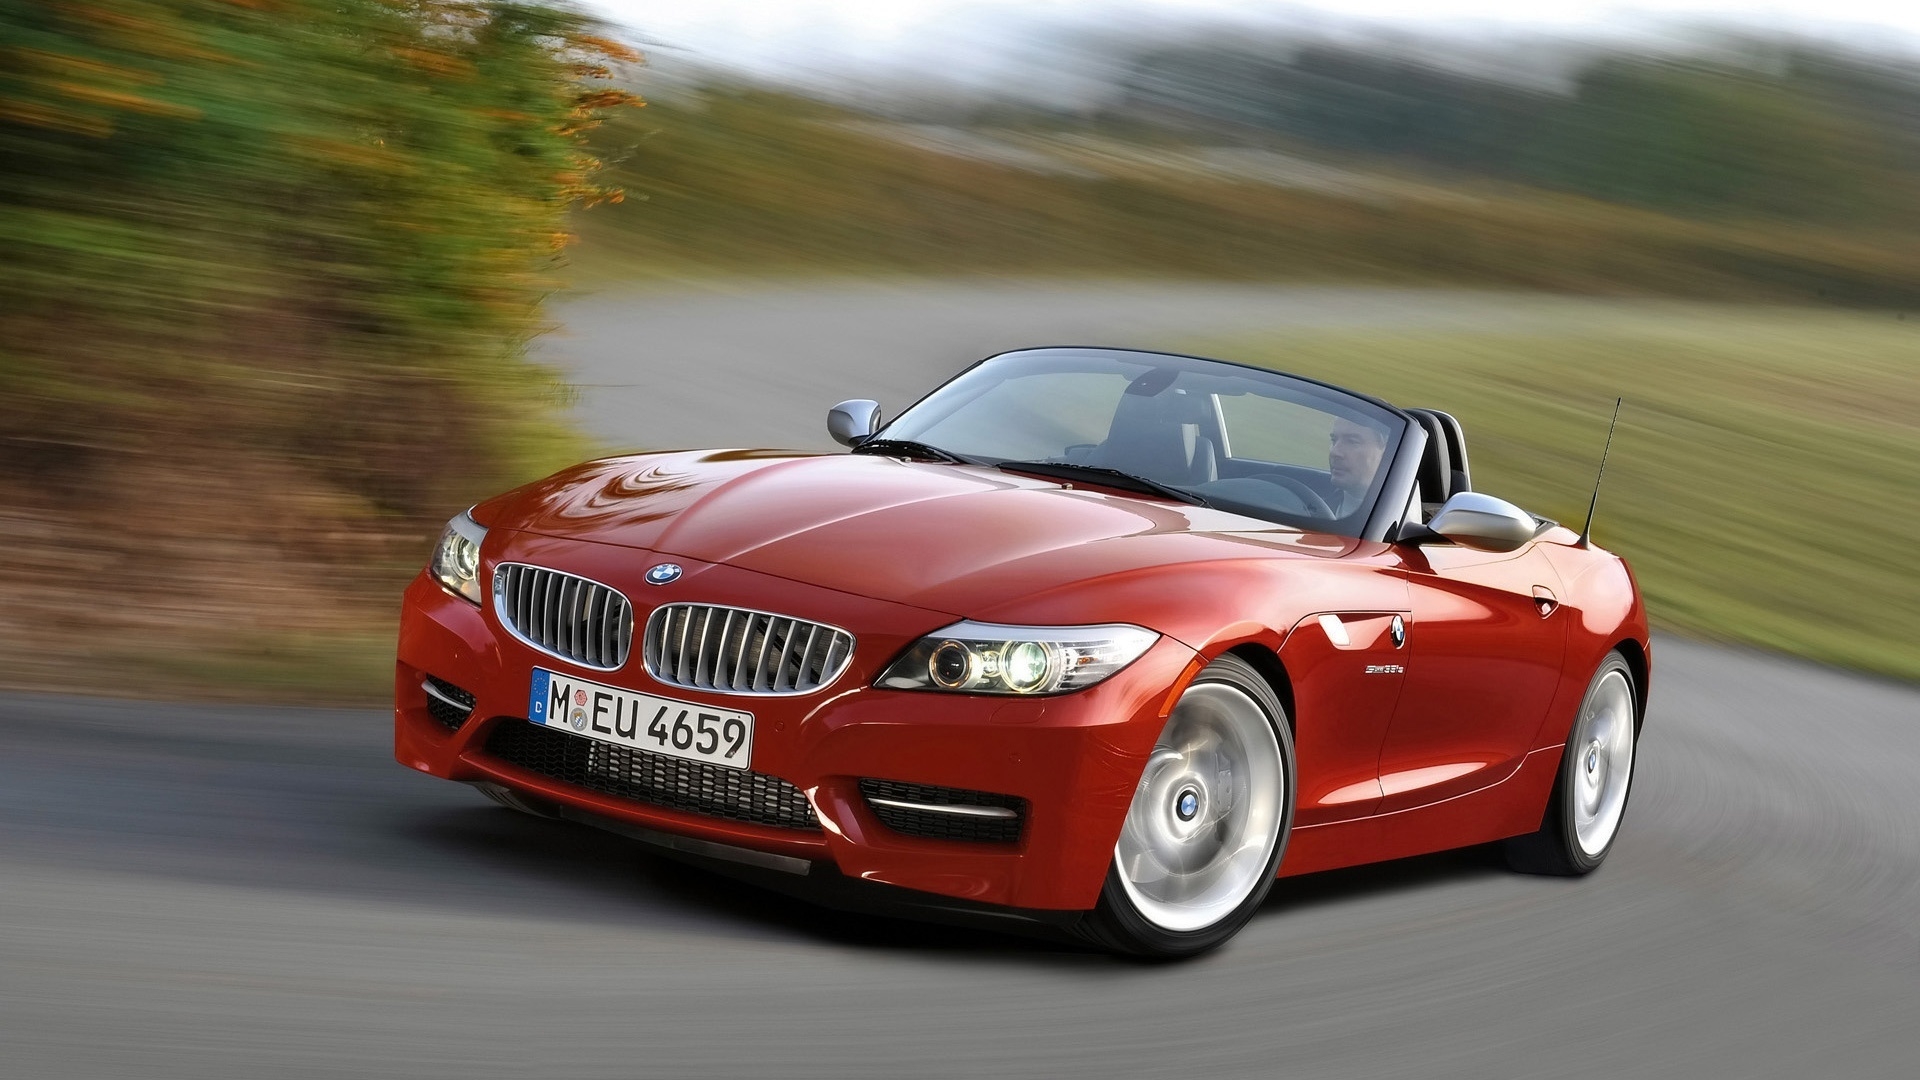 BMW Z4 sDrive35is 2010 for 1920 x 1080 HDTV 1080p resolution